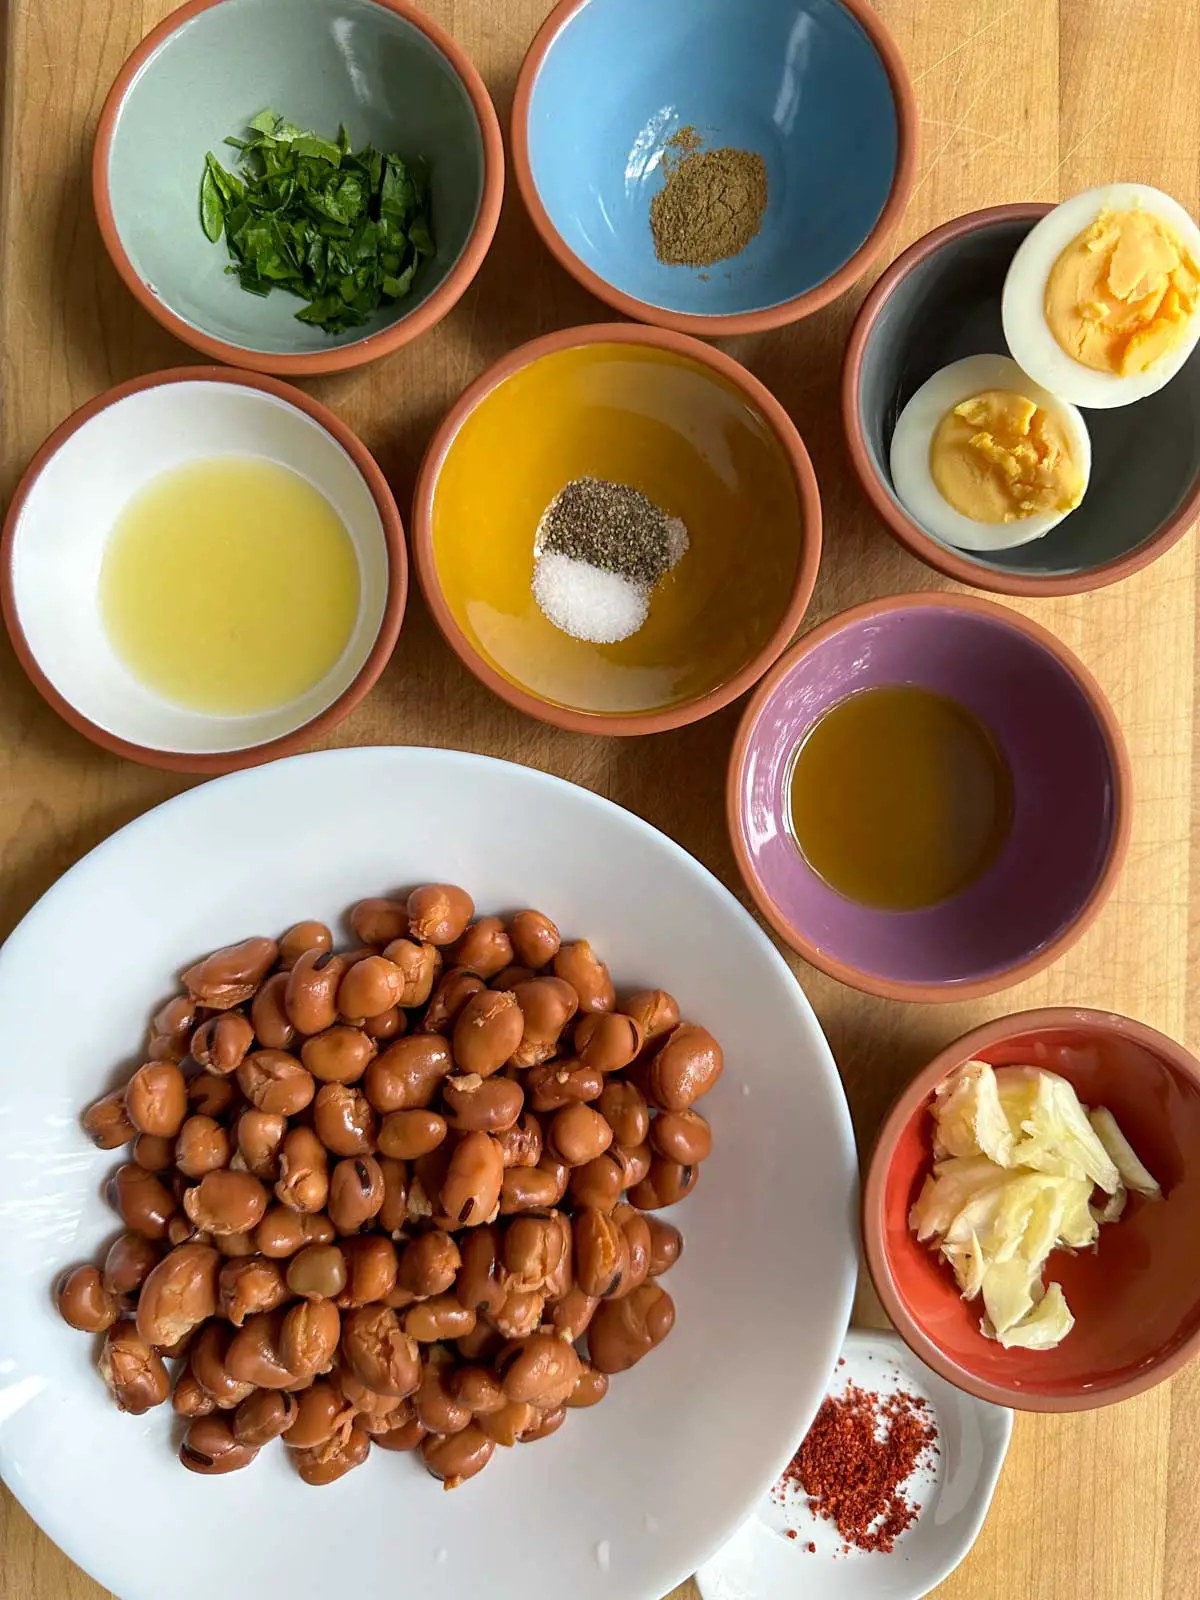 A white bowl with fava beans, small bowls with parsley, lemon juice, cumin, salt and pepper, hard boiled eggs, olive oil, and crushed garlic. There is a small white dish with red pepper flakes.